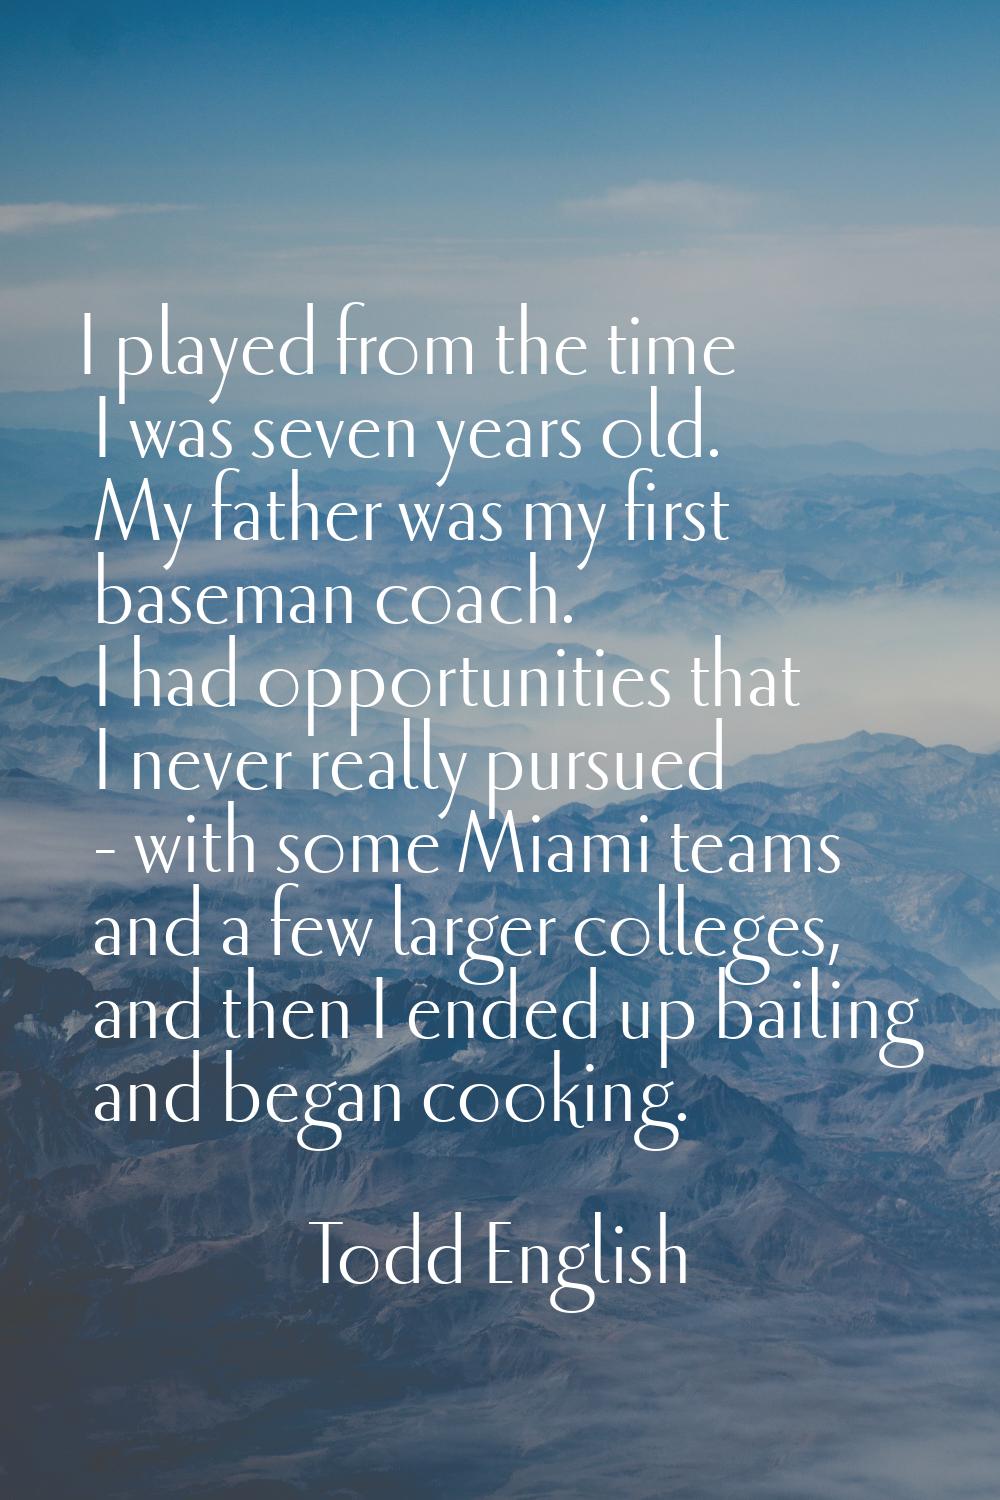 I played from the time I was seven years old. My father was my first baseman coach. I had opportuni